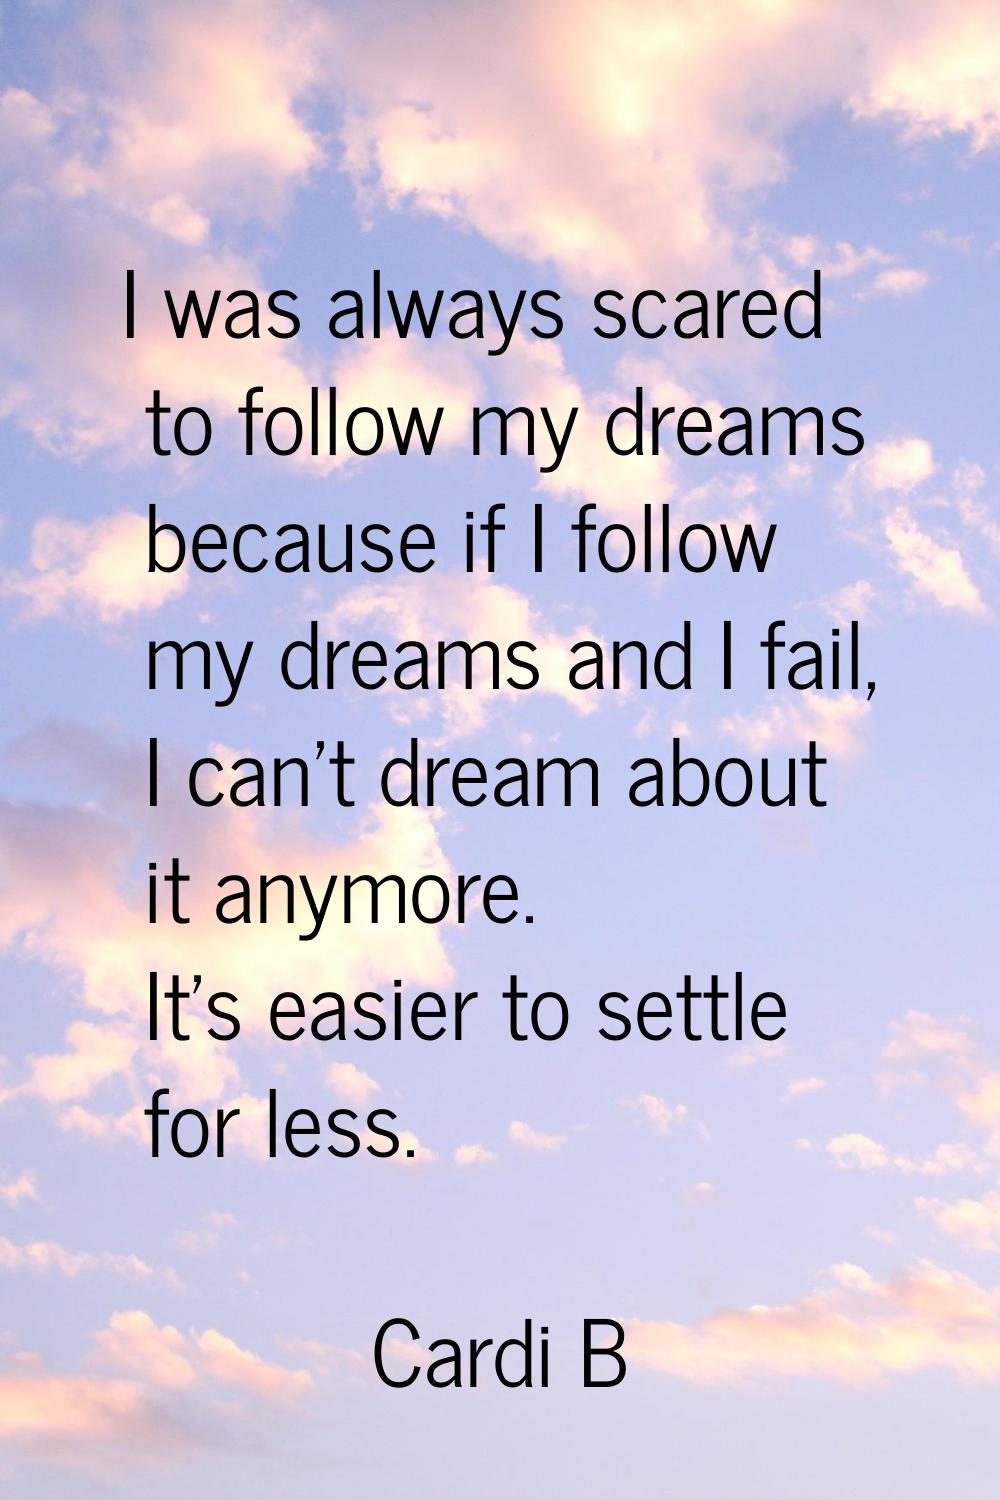 I was always scared to follow my dreams because if I follow my dreams and I fail, I can't dream abo